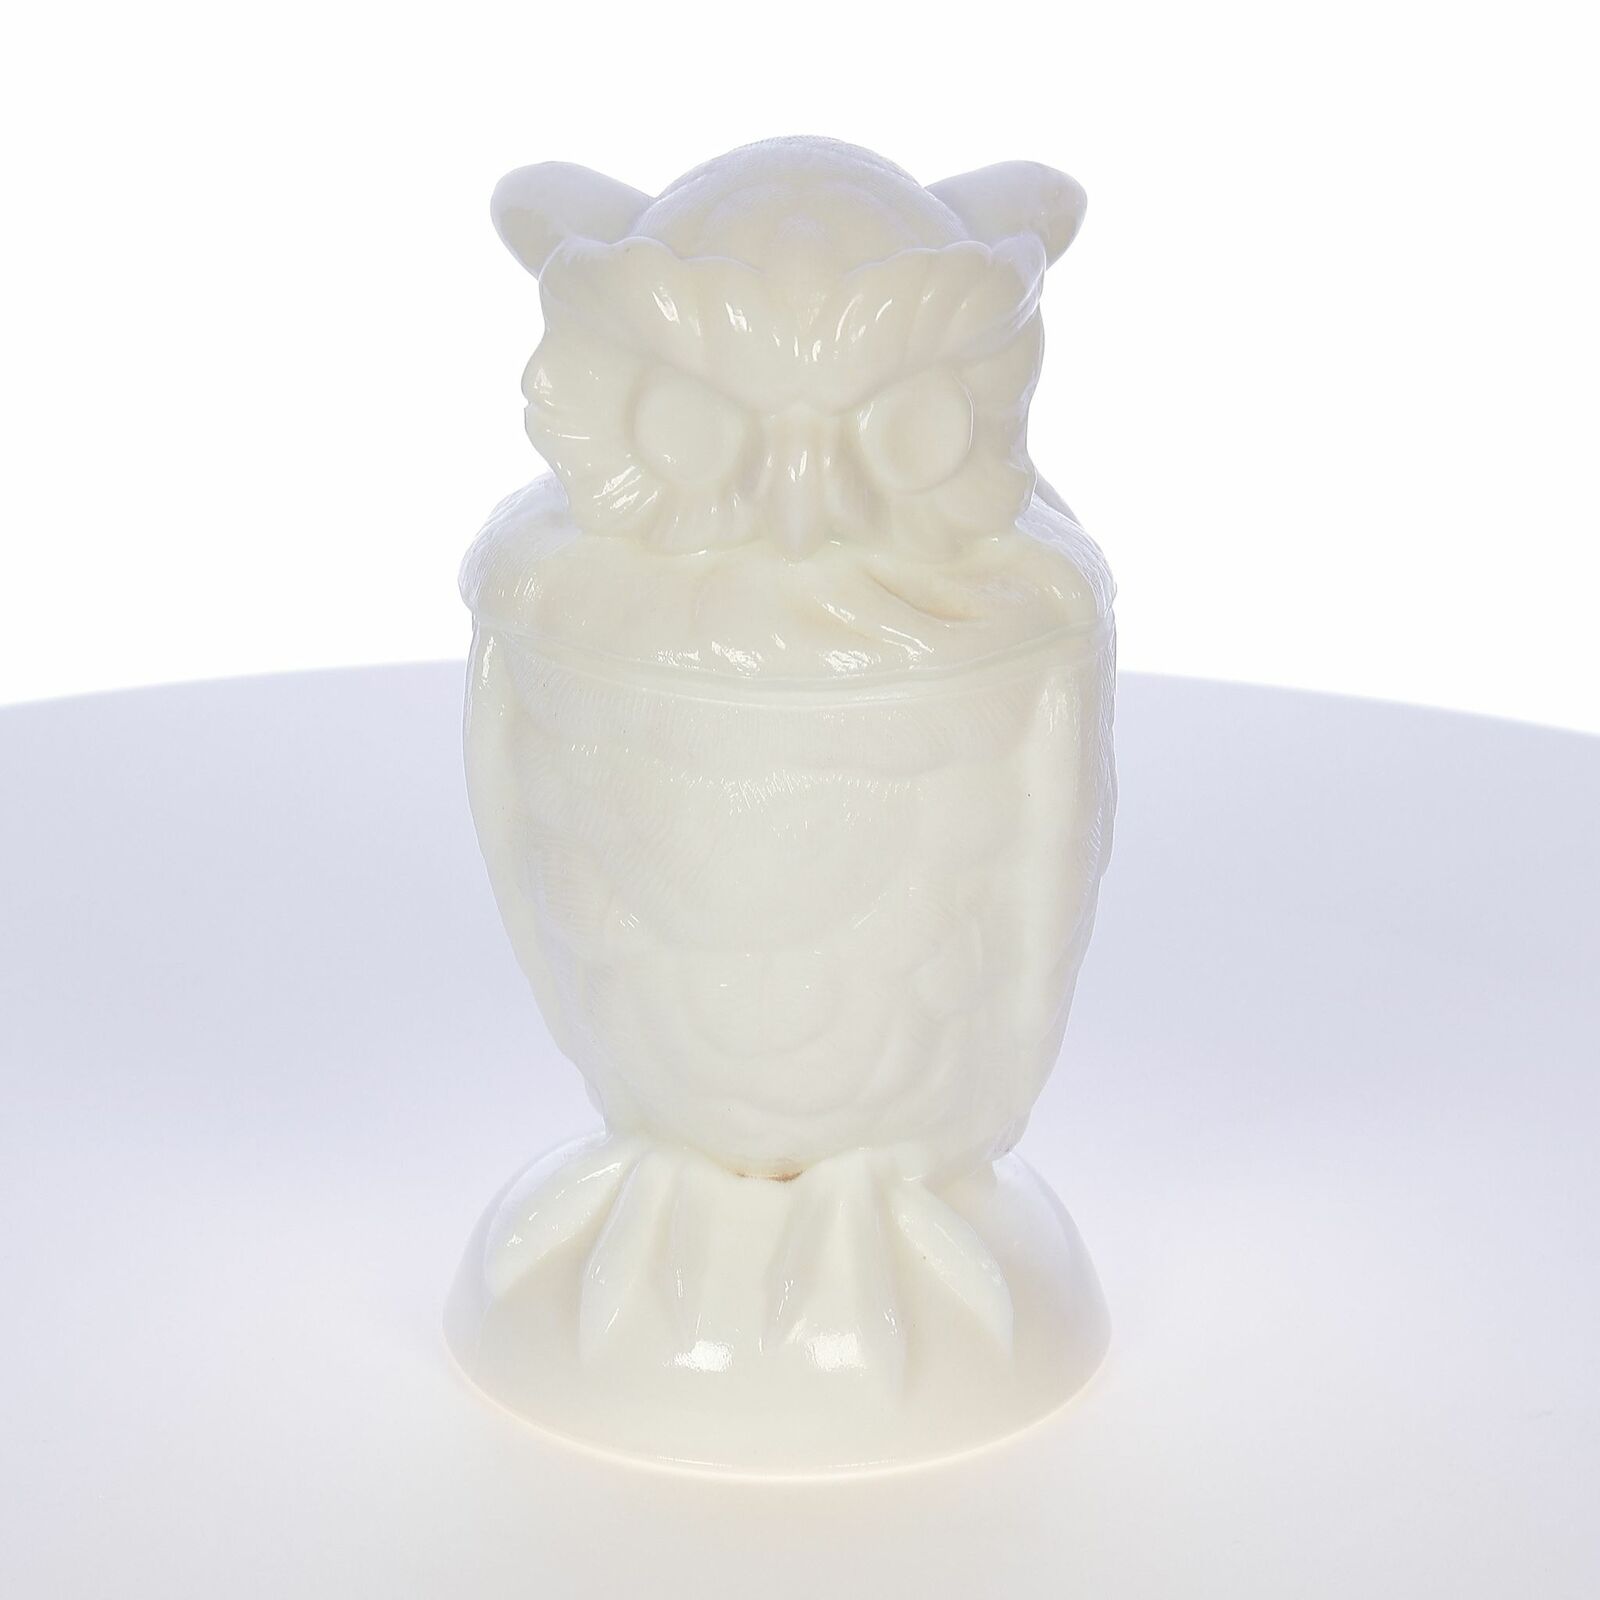 Summit Art Glass Co. / Alig Imperial Glass Co. Owl Canister (white Milk Glass)